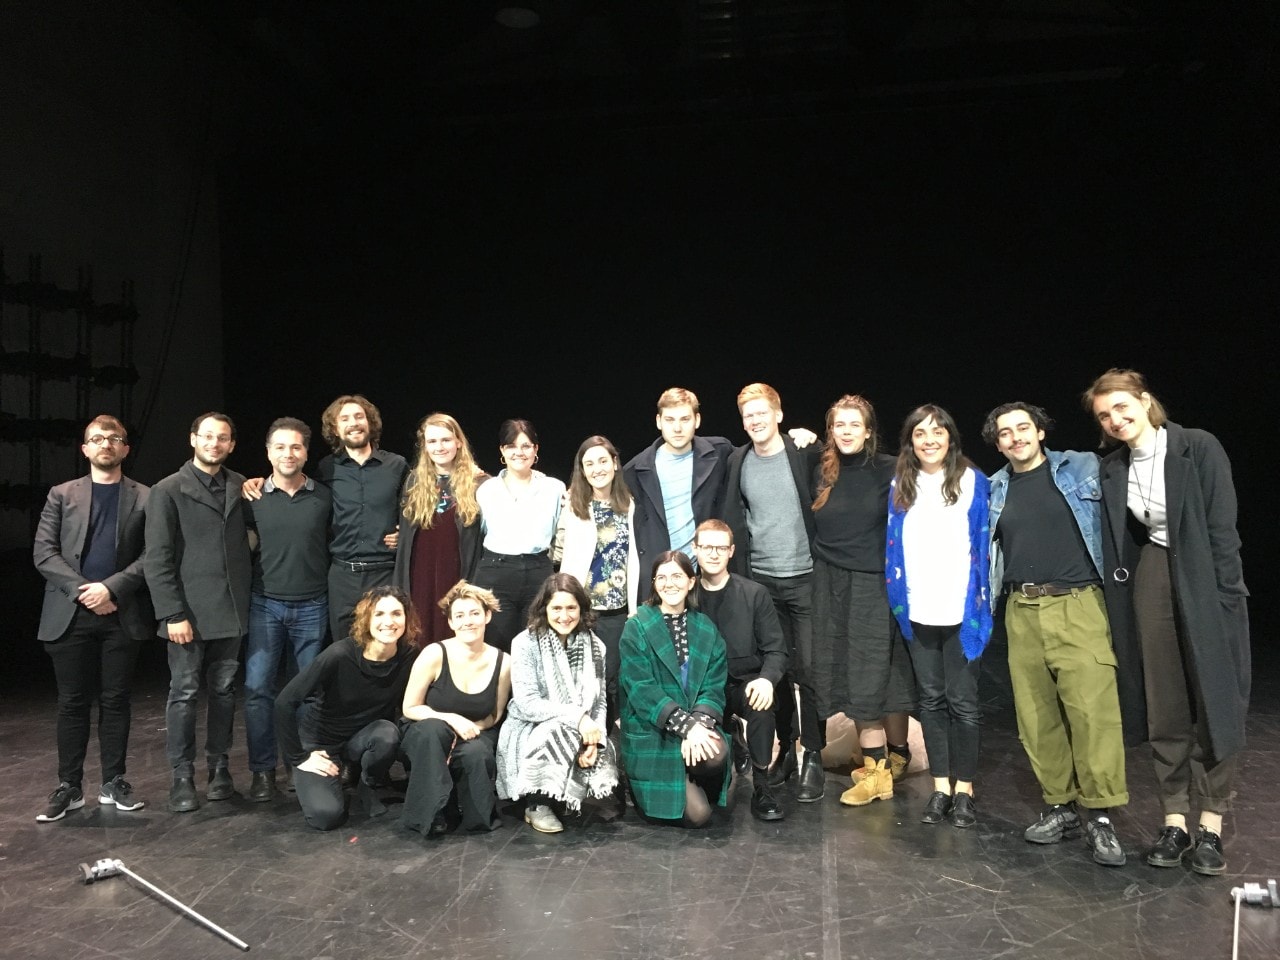 Cast of singers, musicians from Sydney Chamber Opera, Composers and Directors from NIDA, Carriageworks, August 2018.